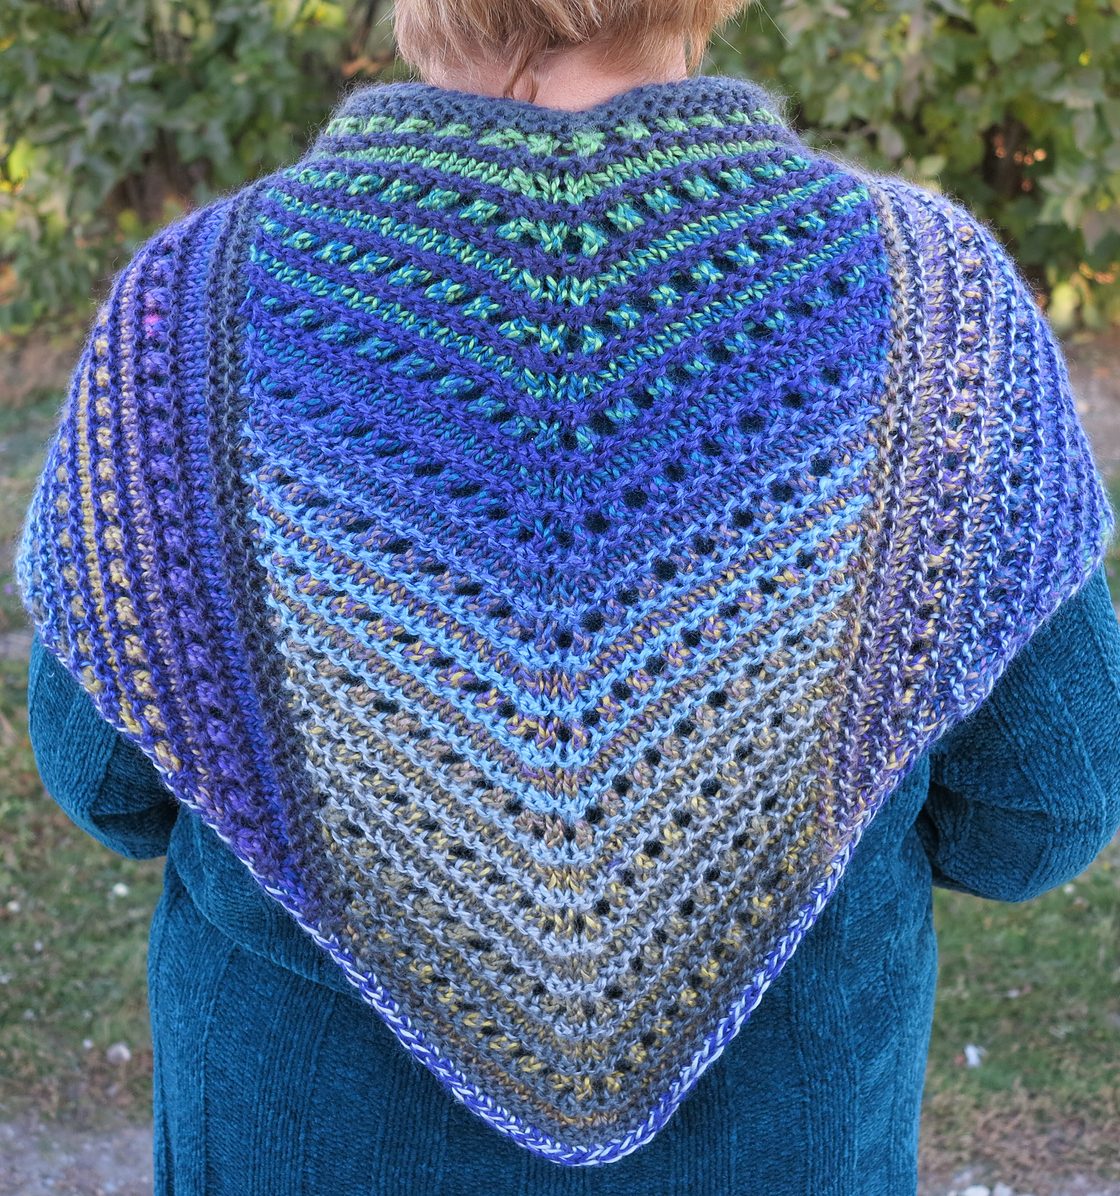 Shawls for Bulky Yarn Knitting Patterns | In the Loop Knitting